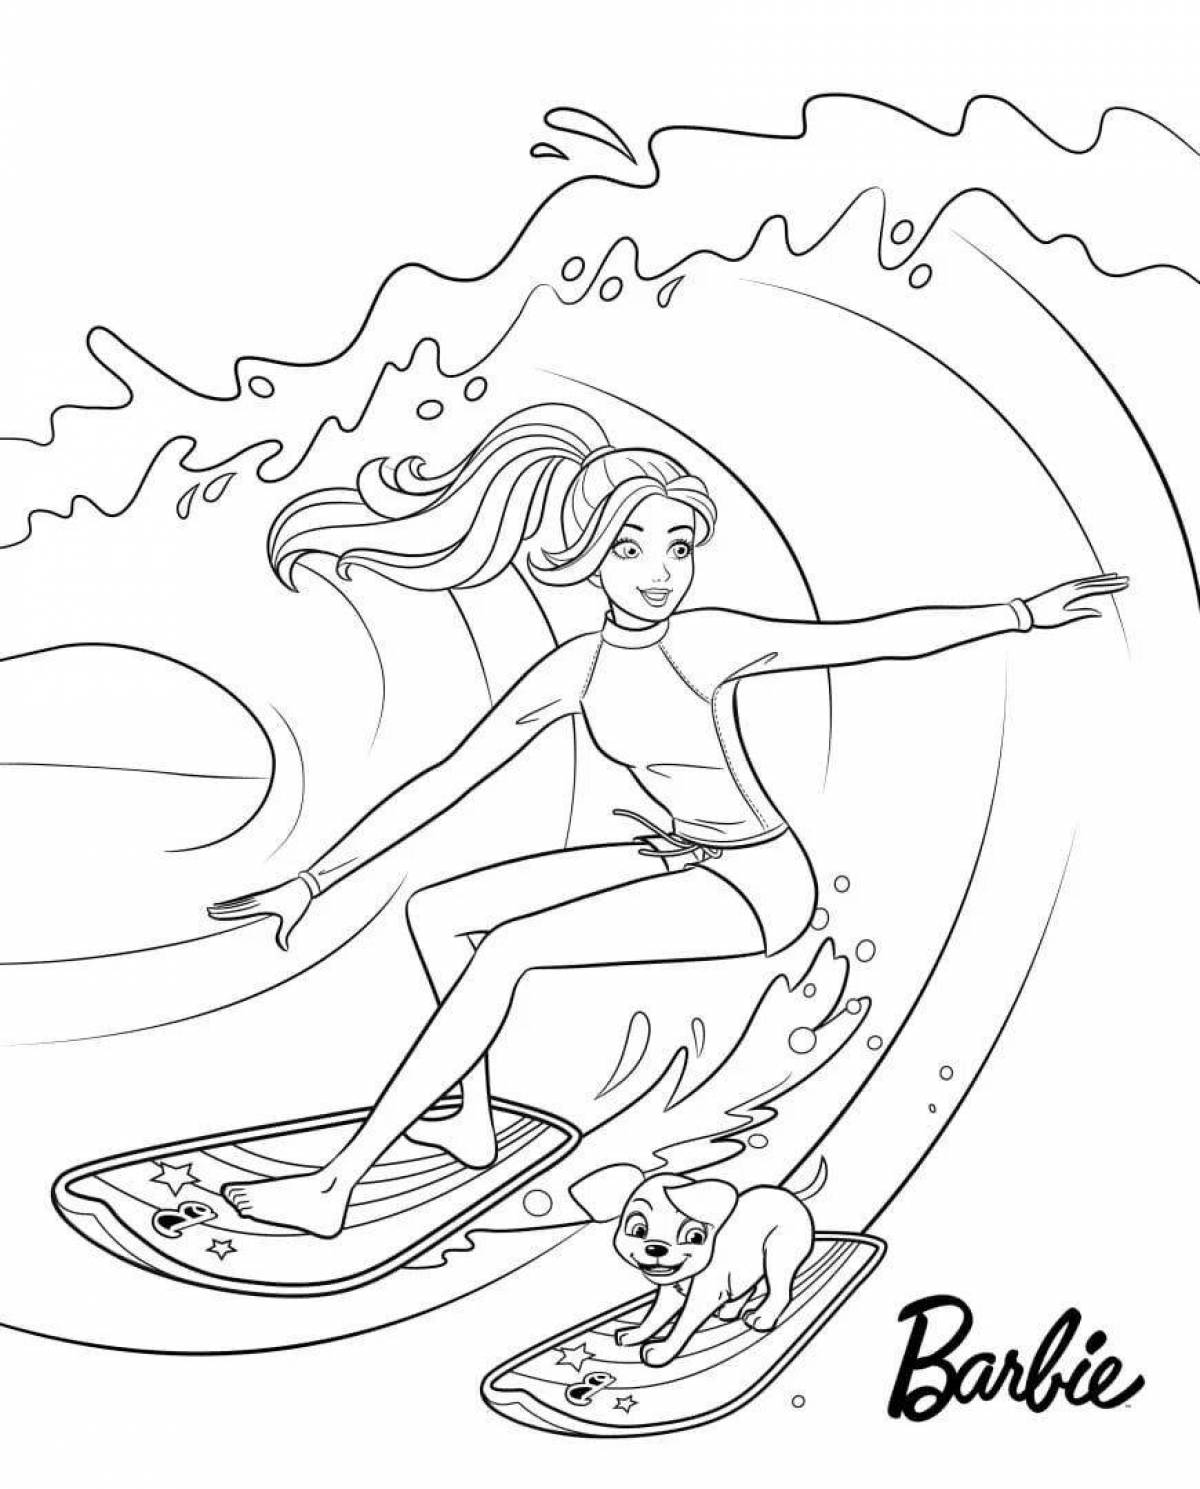 Adorable barbie in the sea coloring page